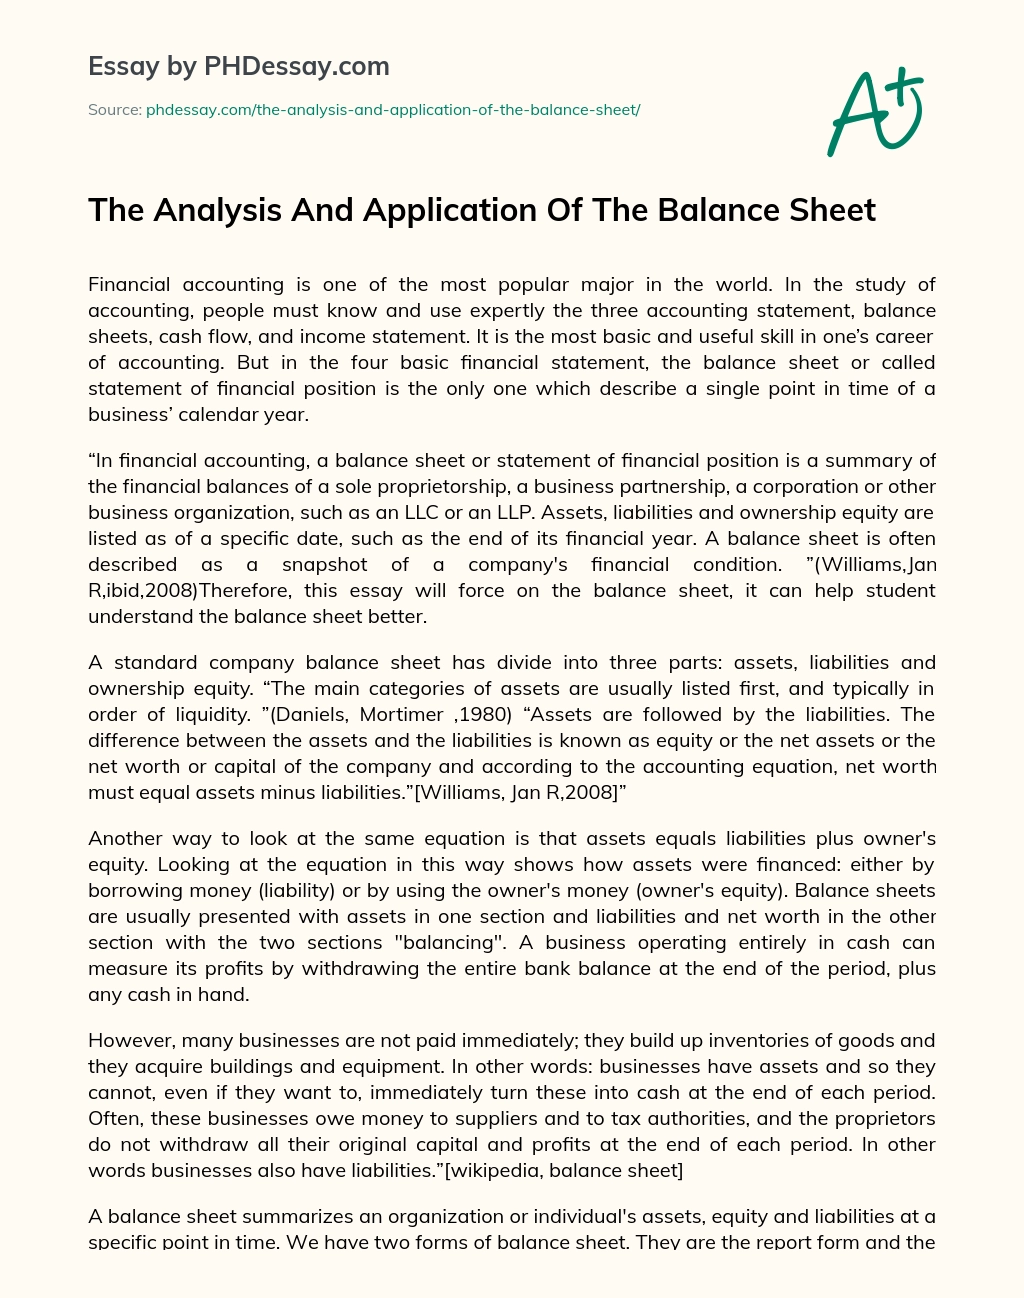 The Analysis And Application Of The Balance Sheet essay